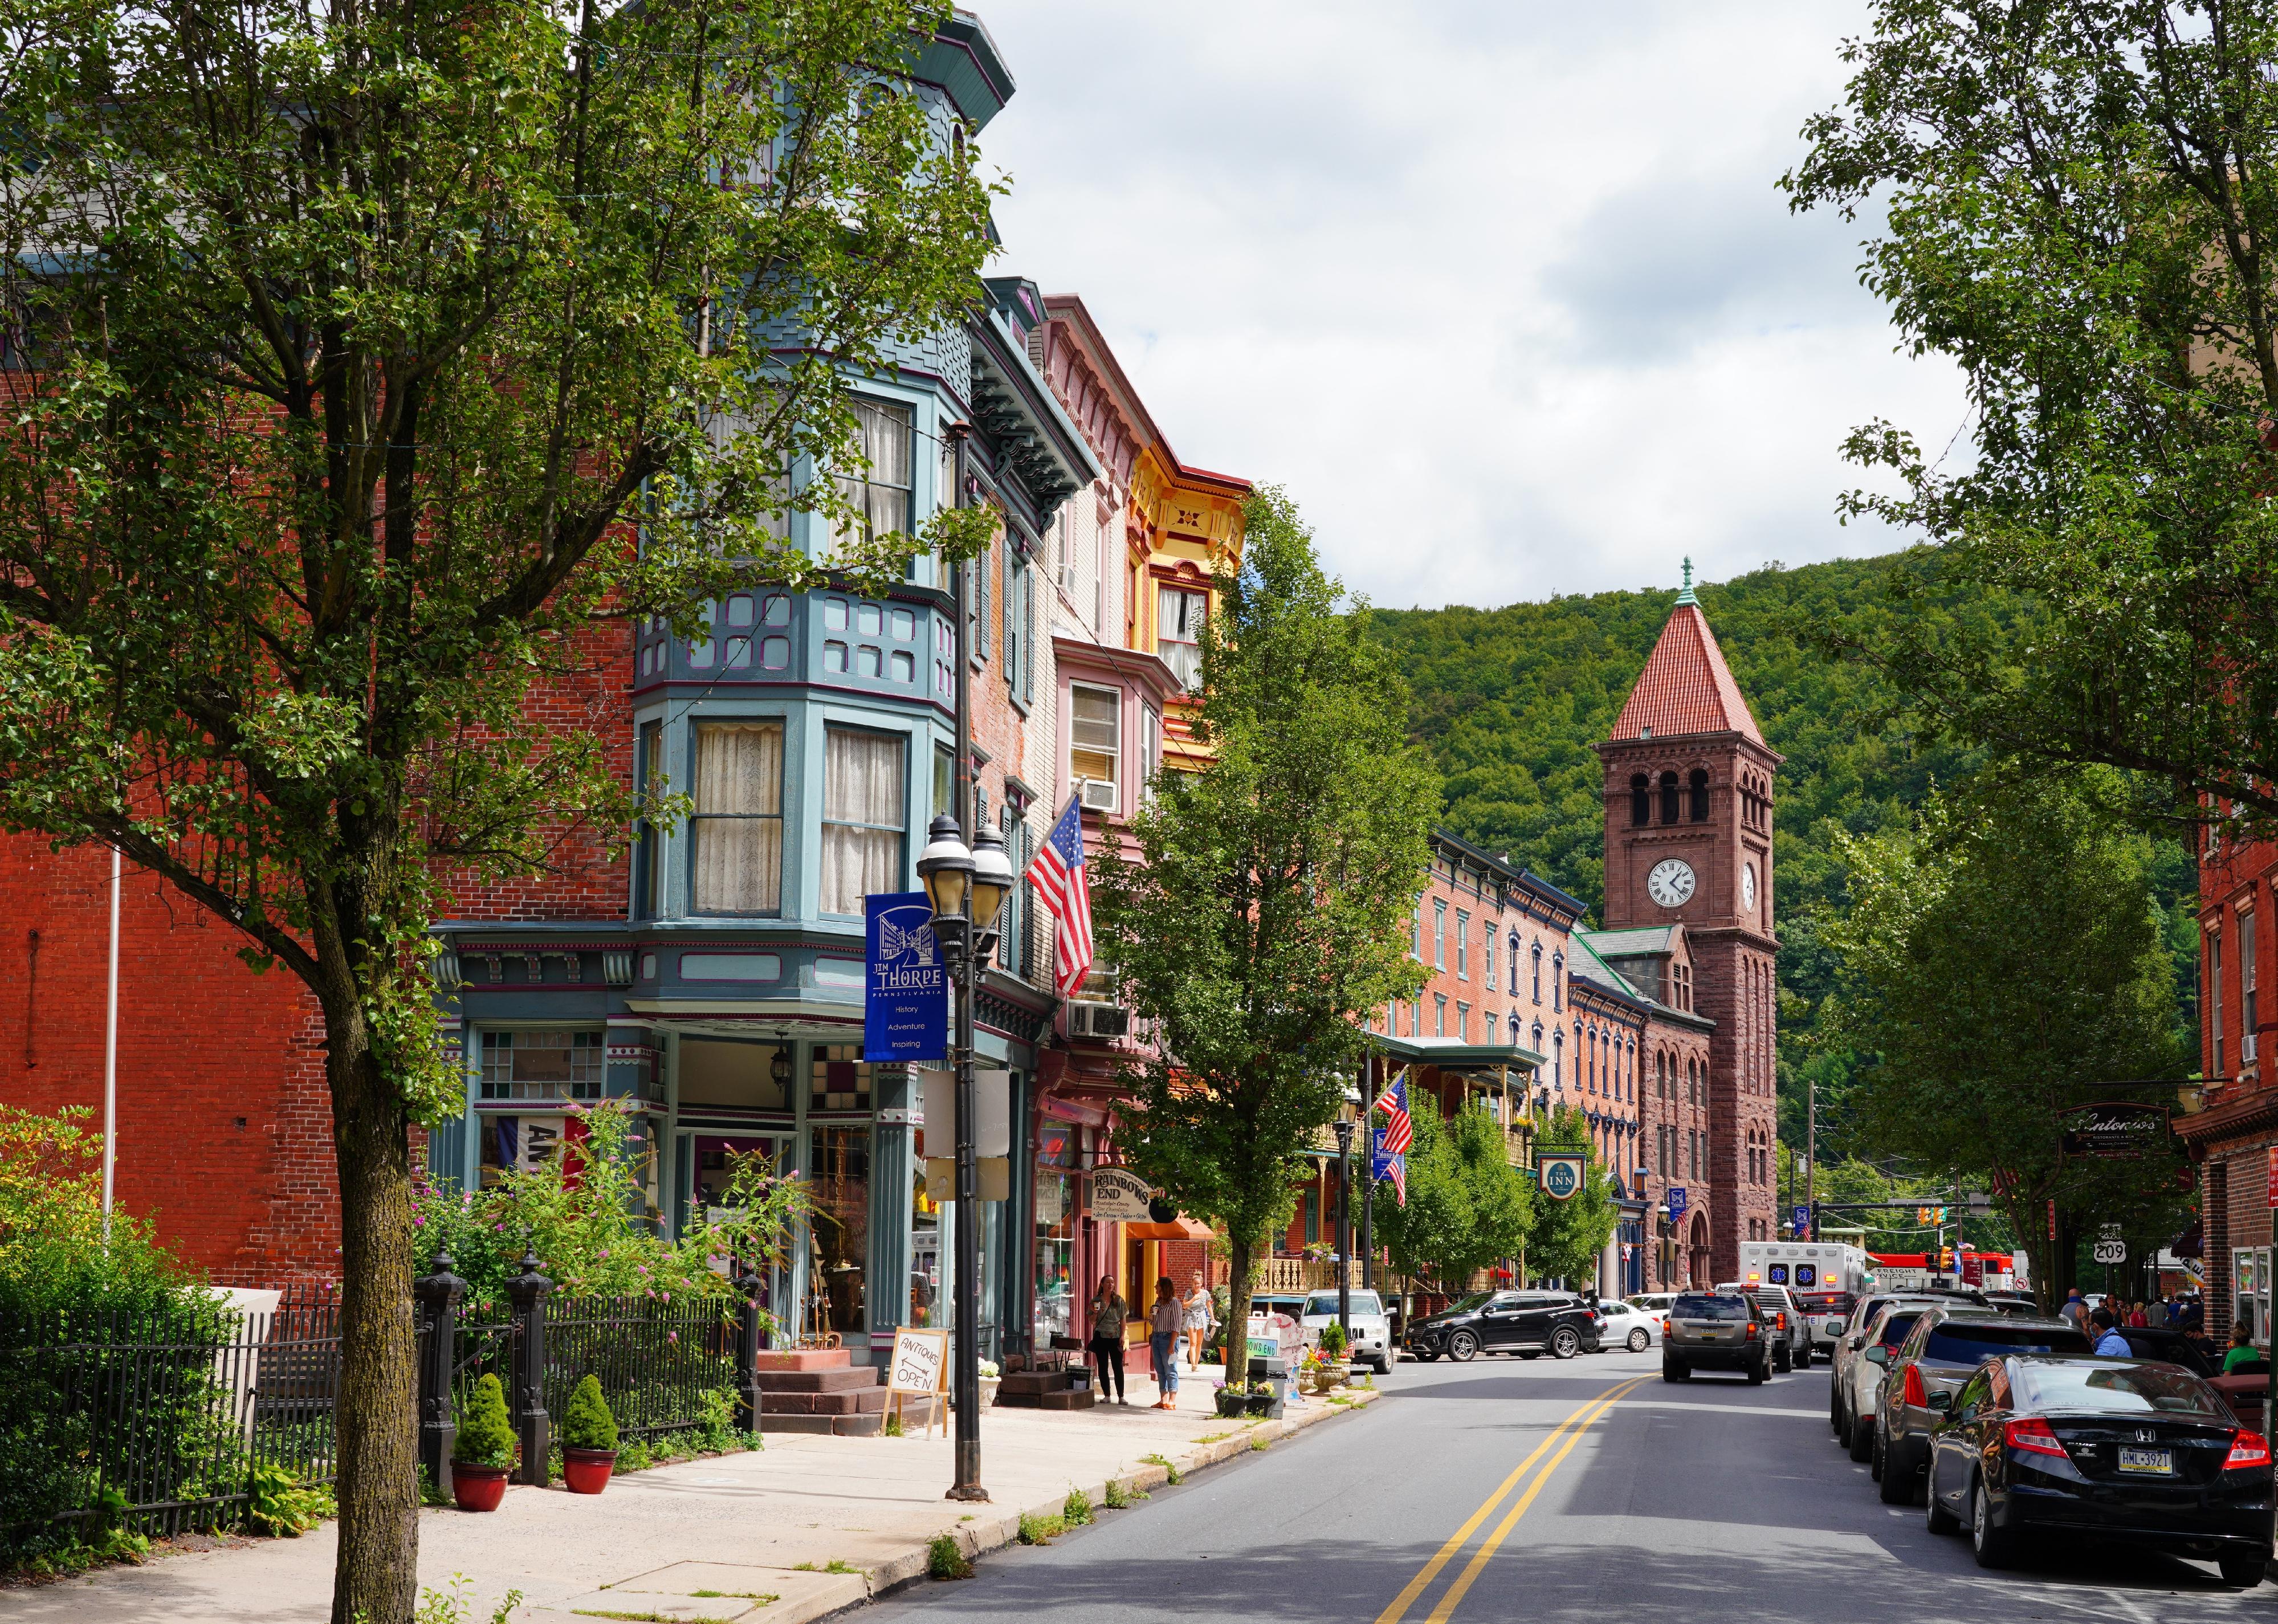 View of the historic town of Jim Thorpe in the Lehigh Valley in Carbon County, Pennsylvania.